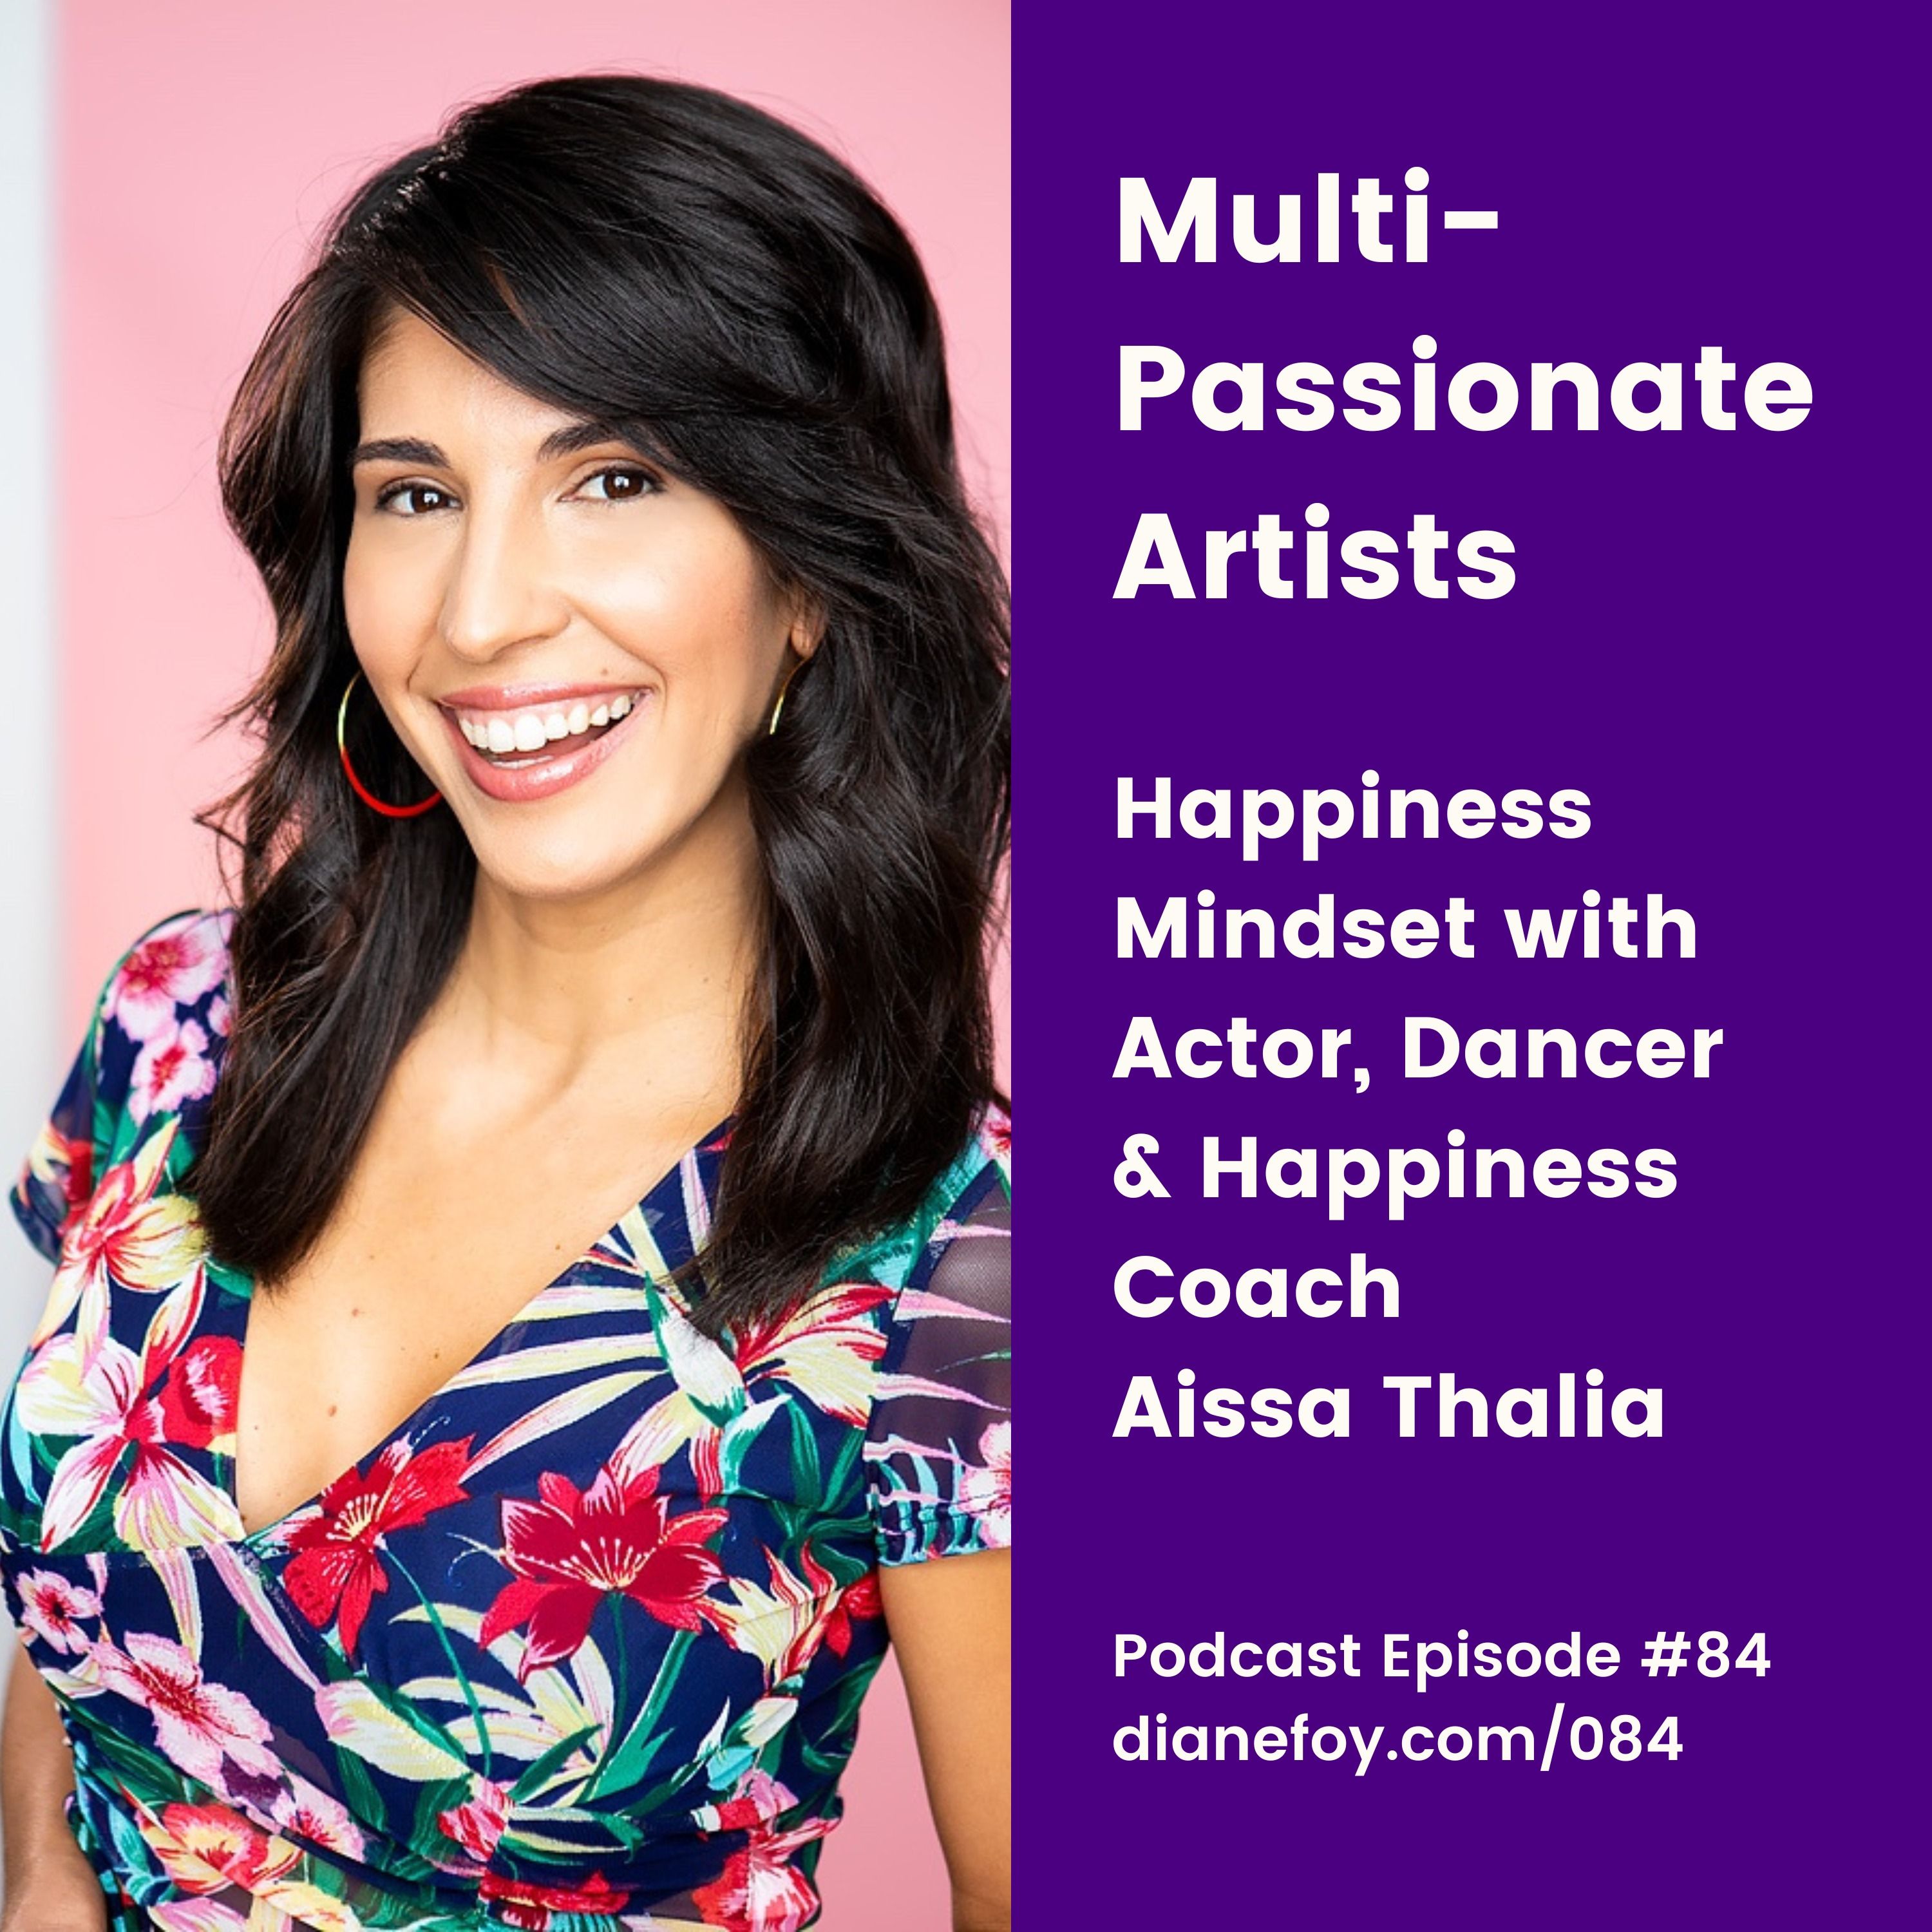 Happiness Mindset with Actor, Dancer & Happiness Coach Aissa Thalia hero artwork